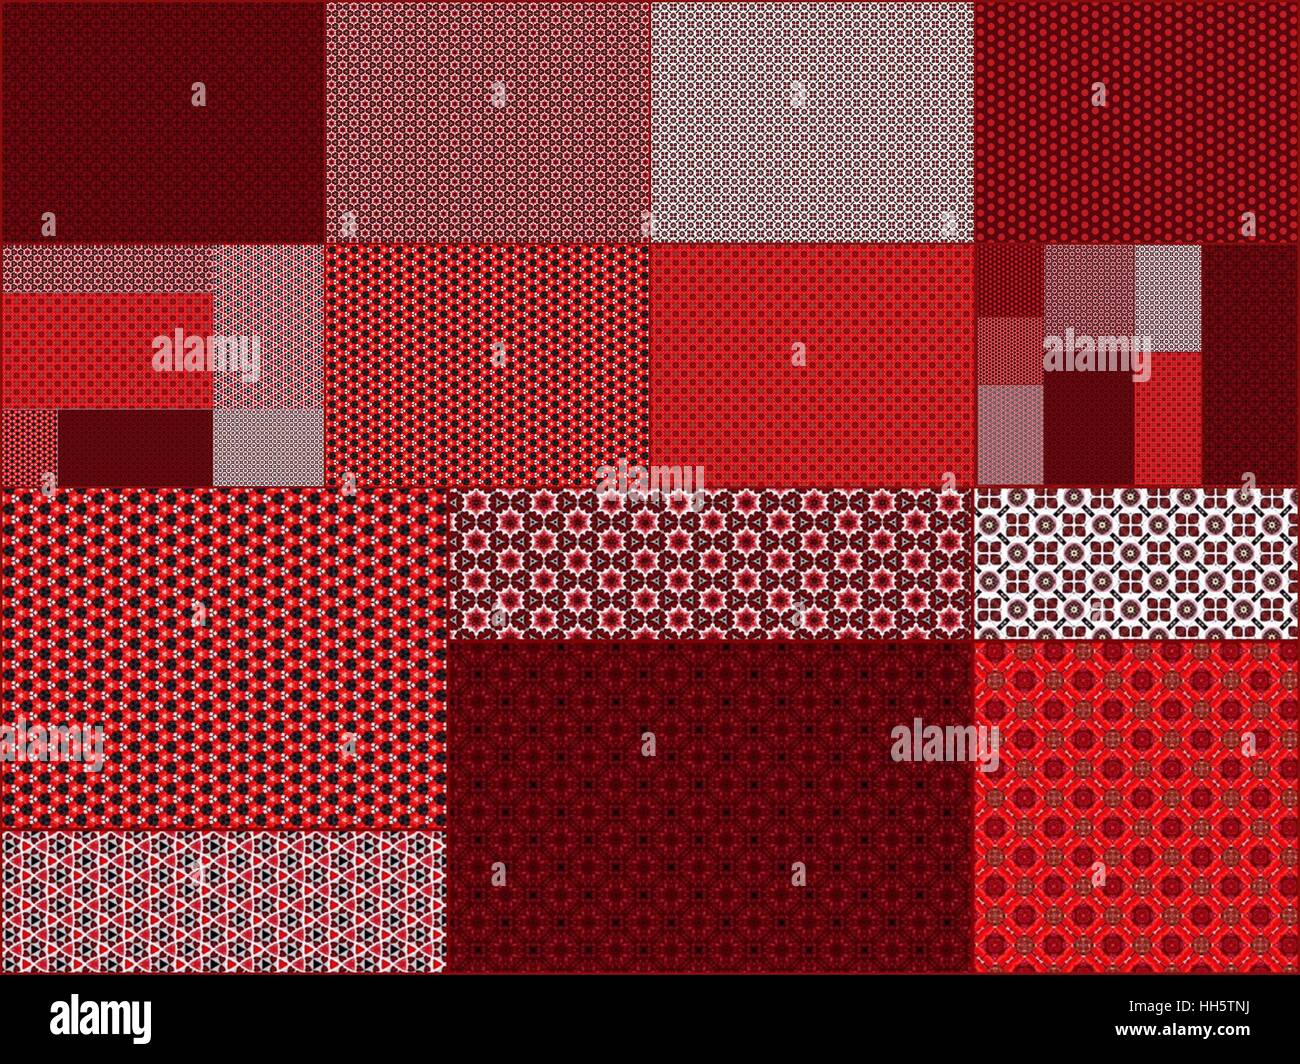 Wallpaper pattern red collage Stock Photo